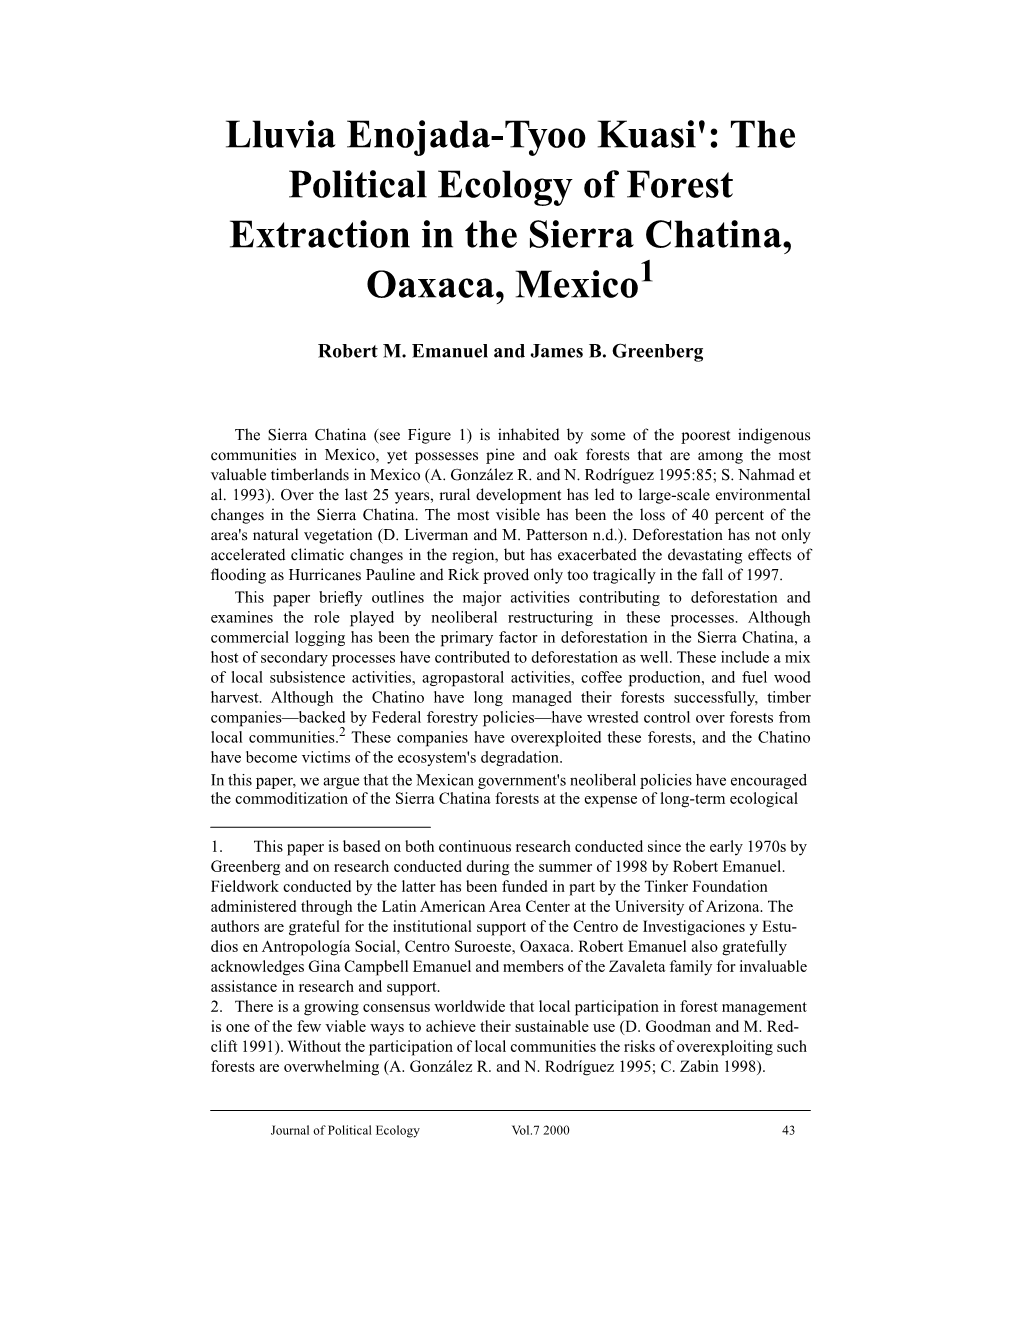 Lluvia Enojada-Tyoo Kuasi': the Political Ecology of Forest Extraction in the Sierra Chatina, Oaxaca, Mexico1